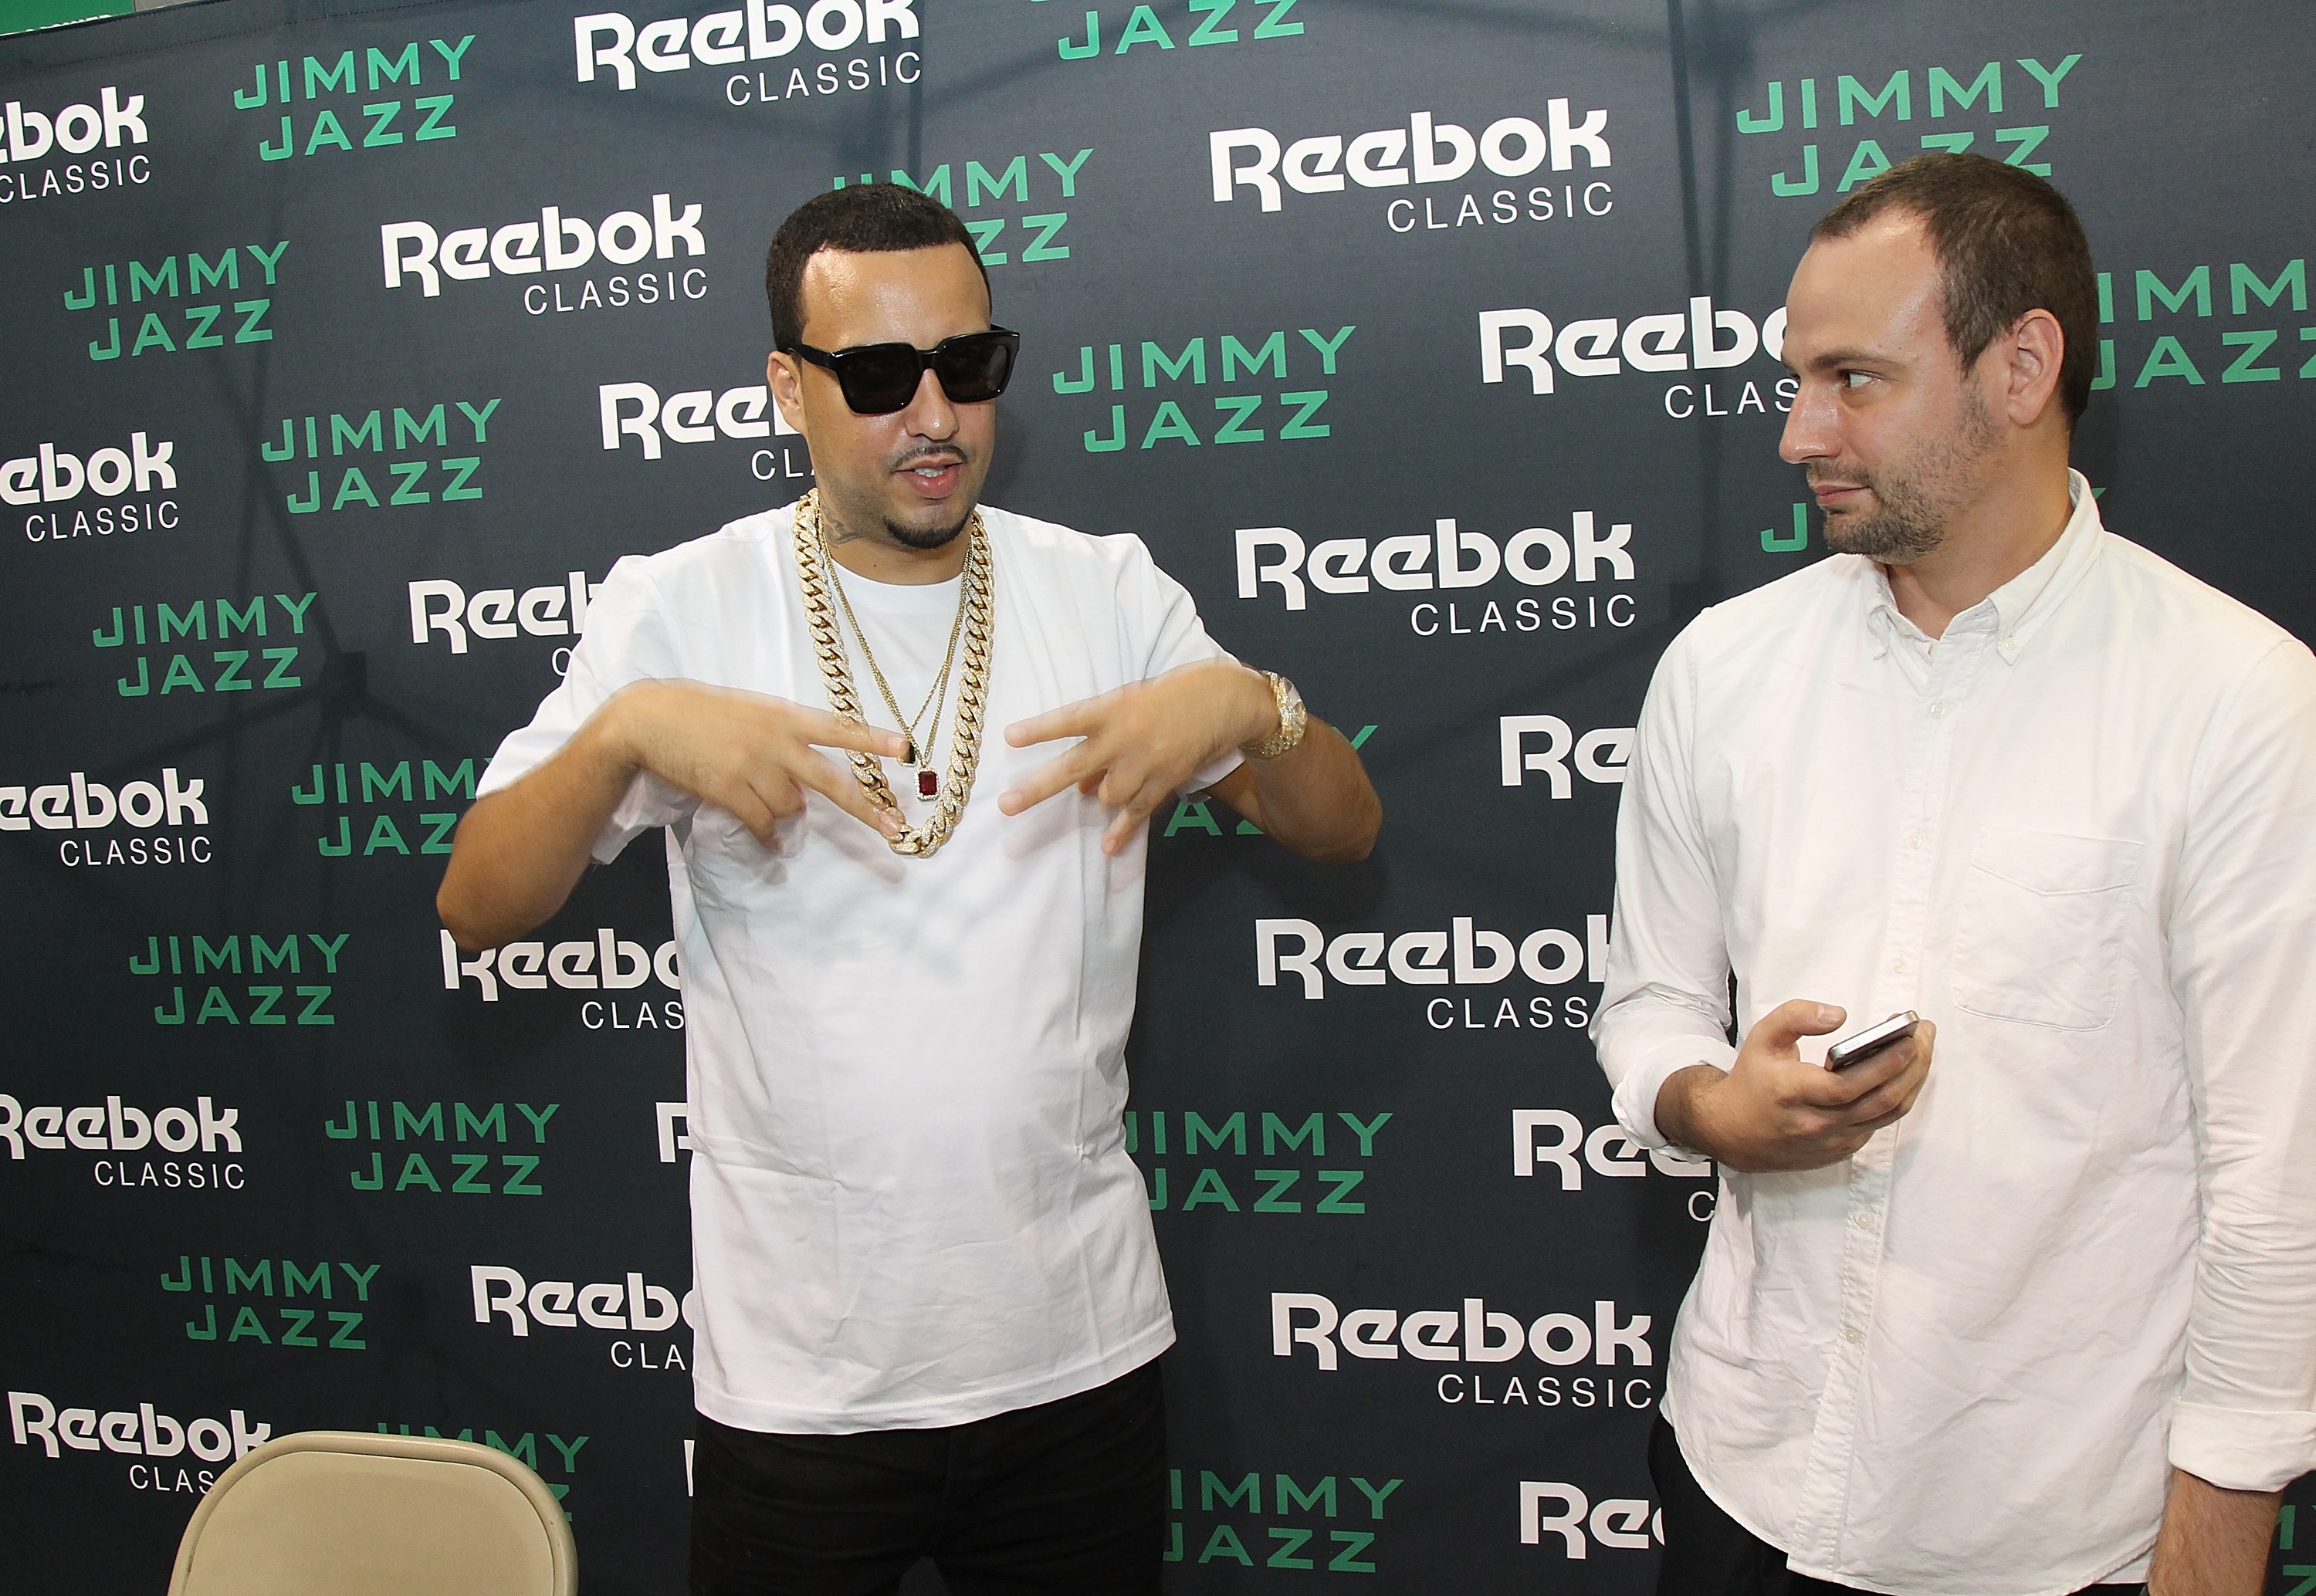 NEW YORK, NY - AUGUST 30:  French Montana (L) launches Ventilator ST at Jimmy Jazz in Harlem on August 30, 2015 in New York City.  (Photo by Bennett Raglin/Getty Images for Reebok)